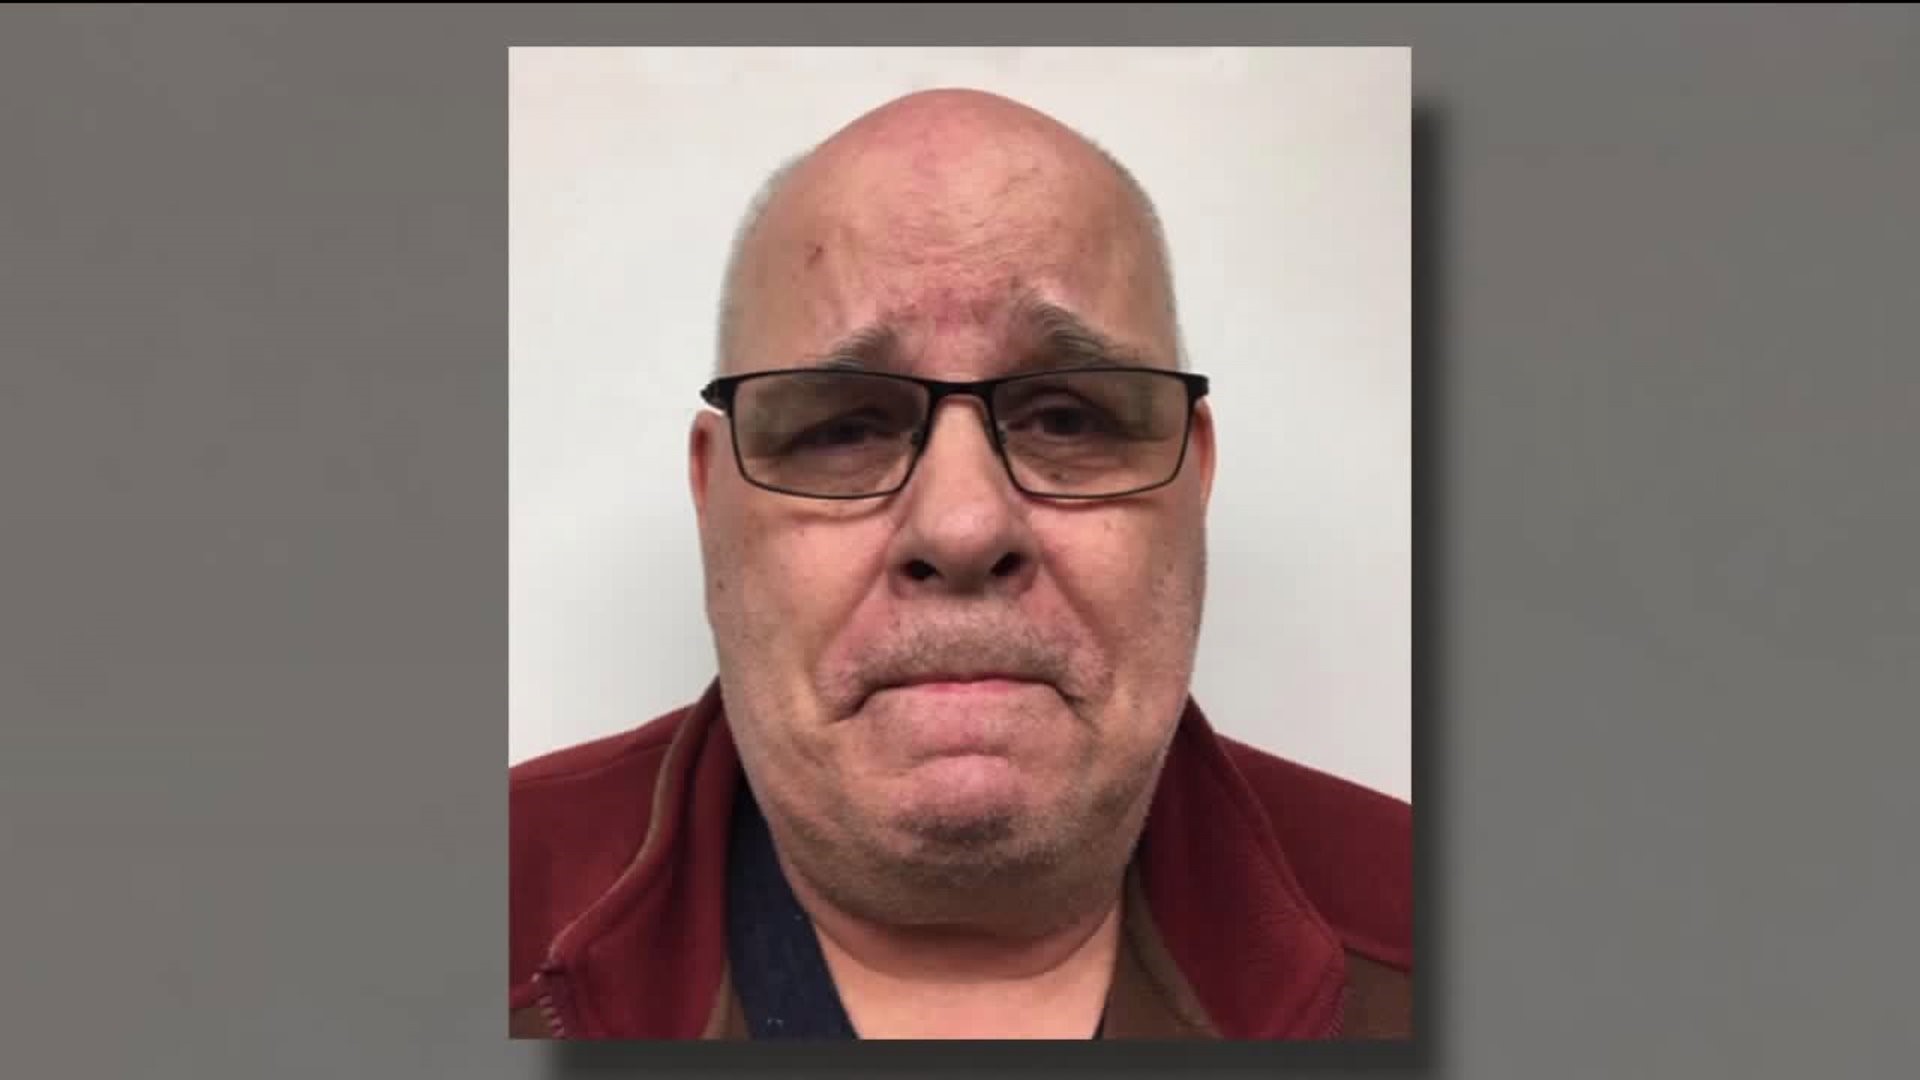 Middle Porn - Middle School Basketball Coach, Retired Teacher Faces Child Porn Charges |  wnep.com